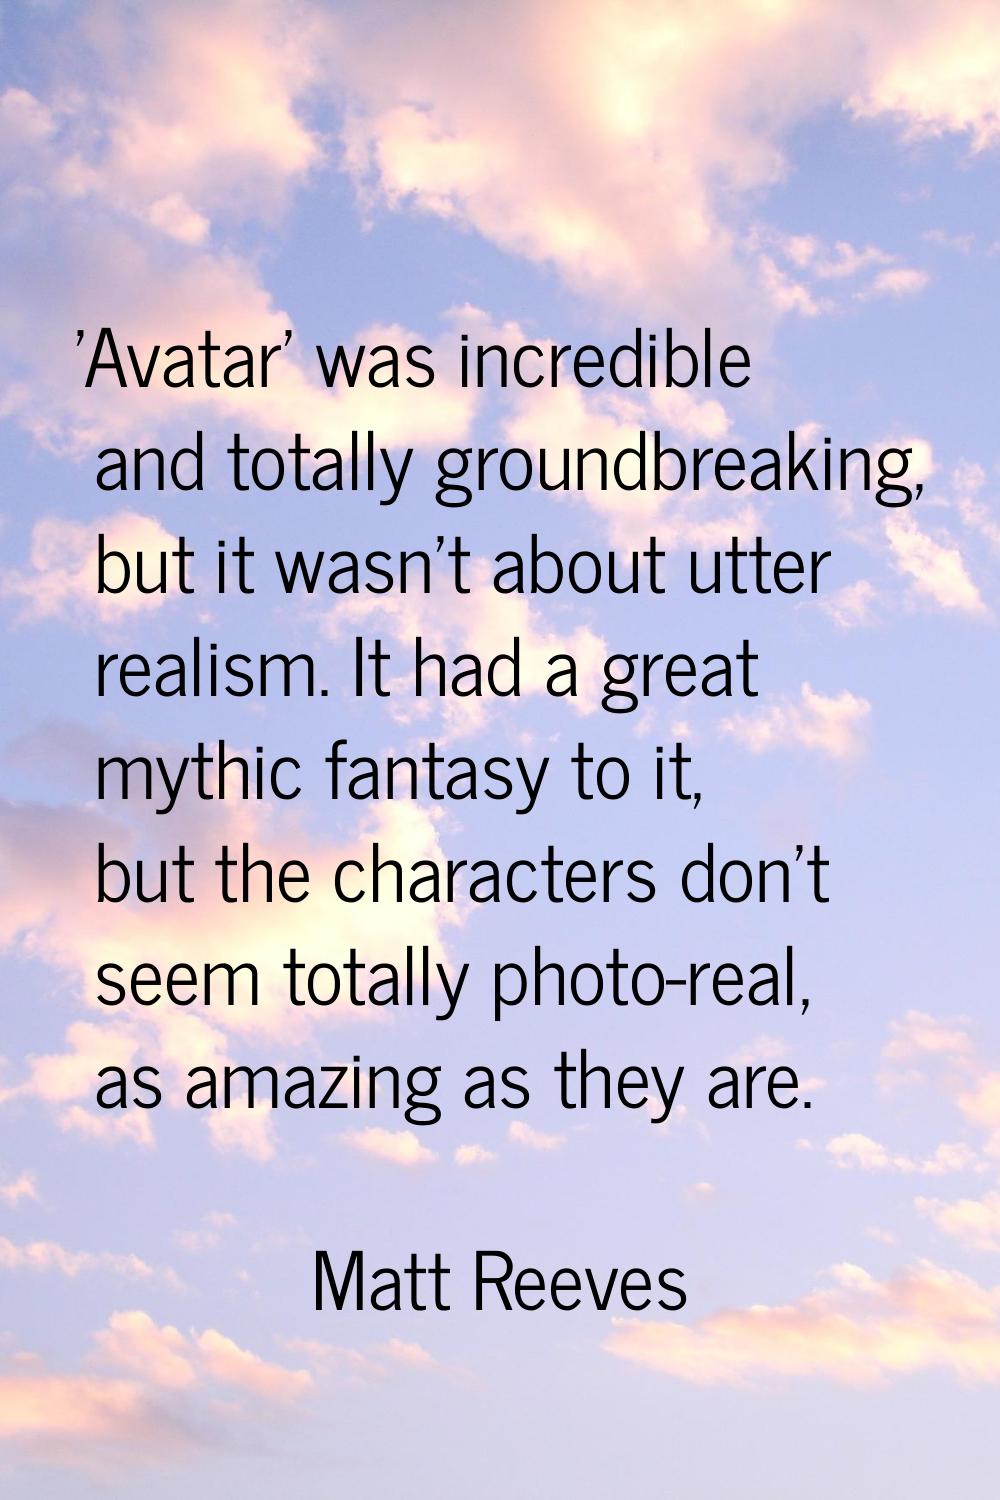 'Avatar' was incredible and totally groundbreaking, but it wasn't about utter realism. It had a gre